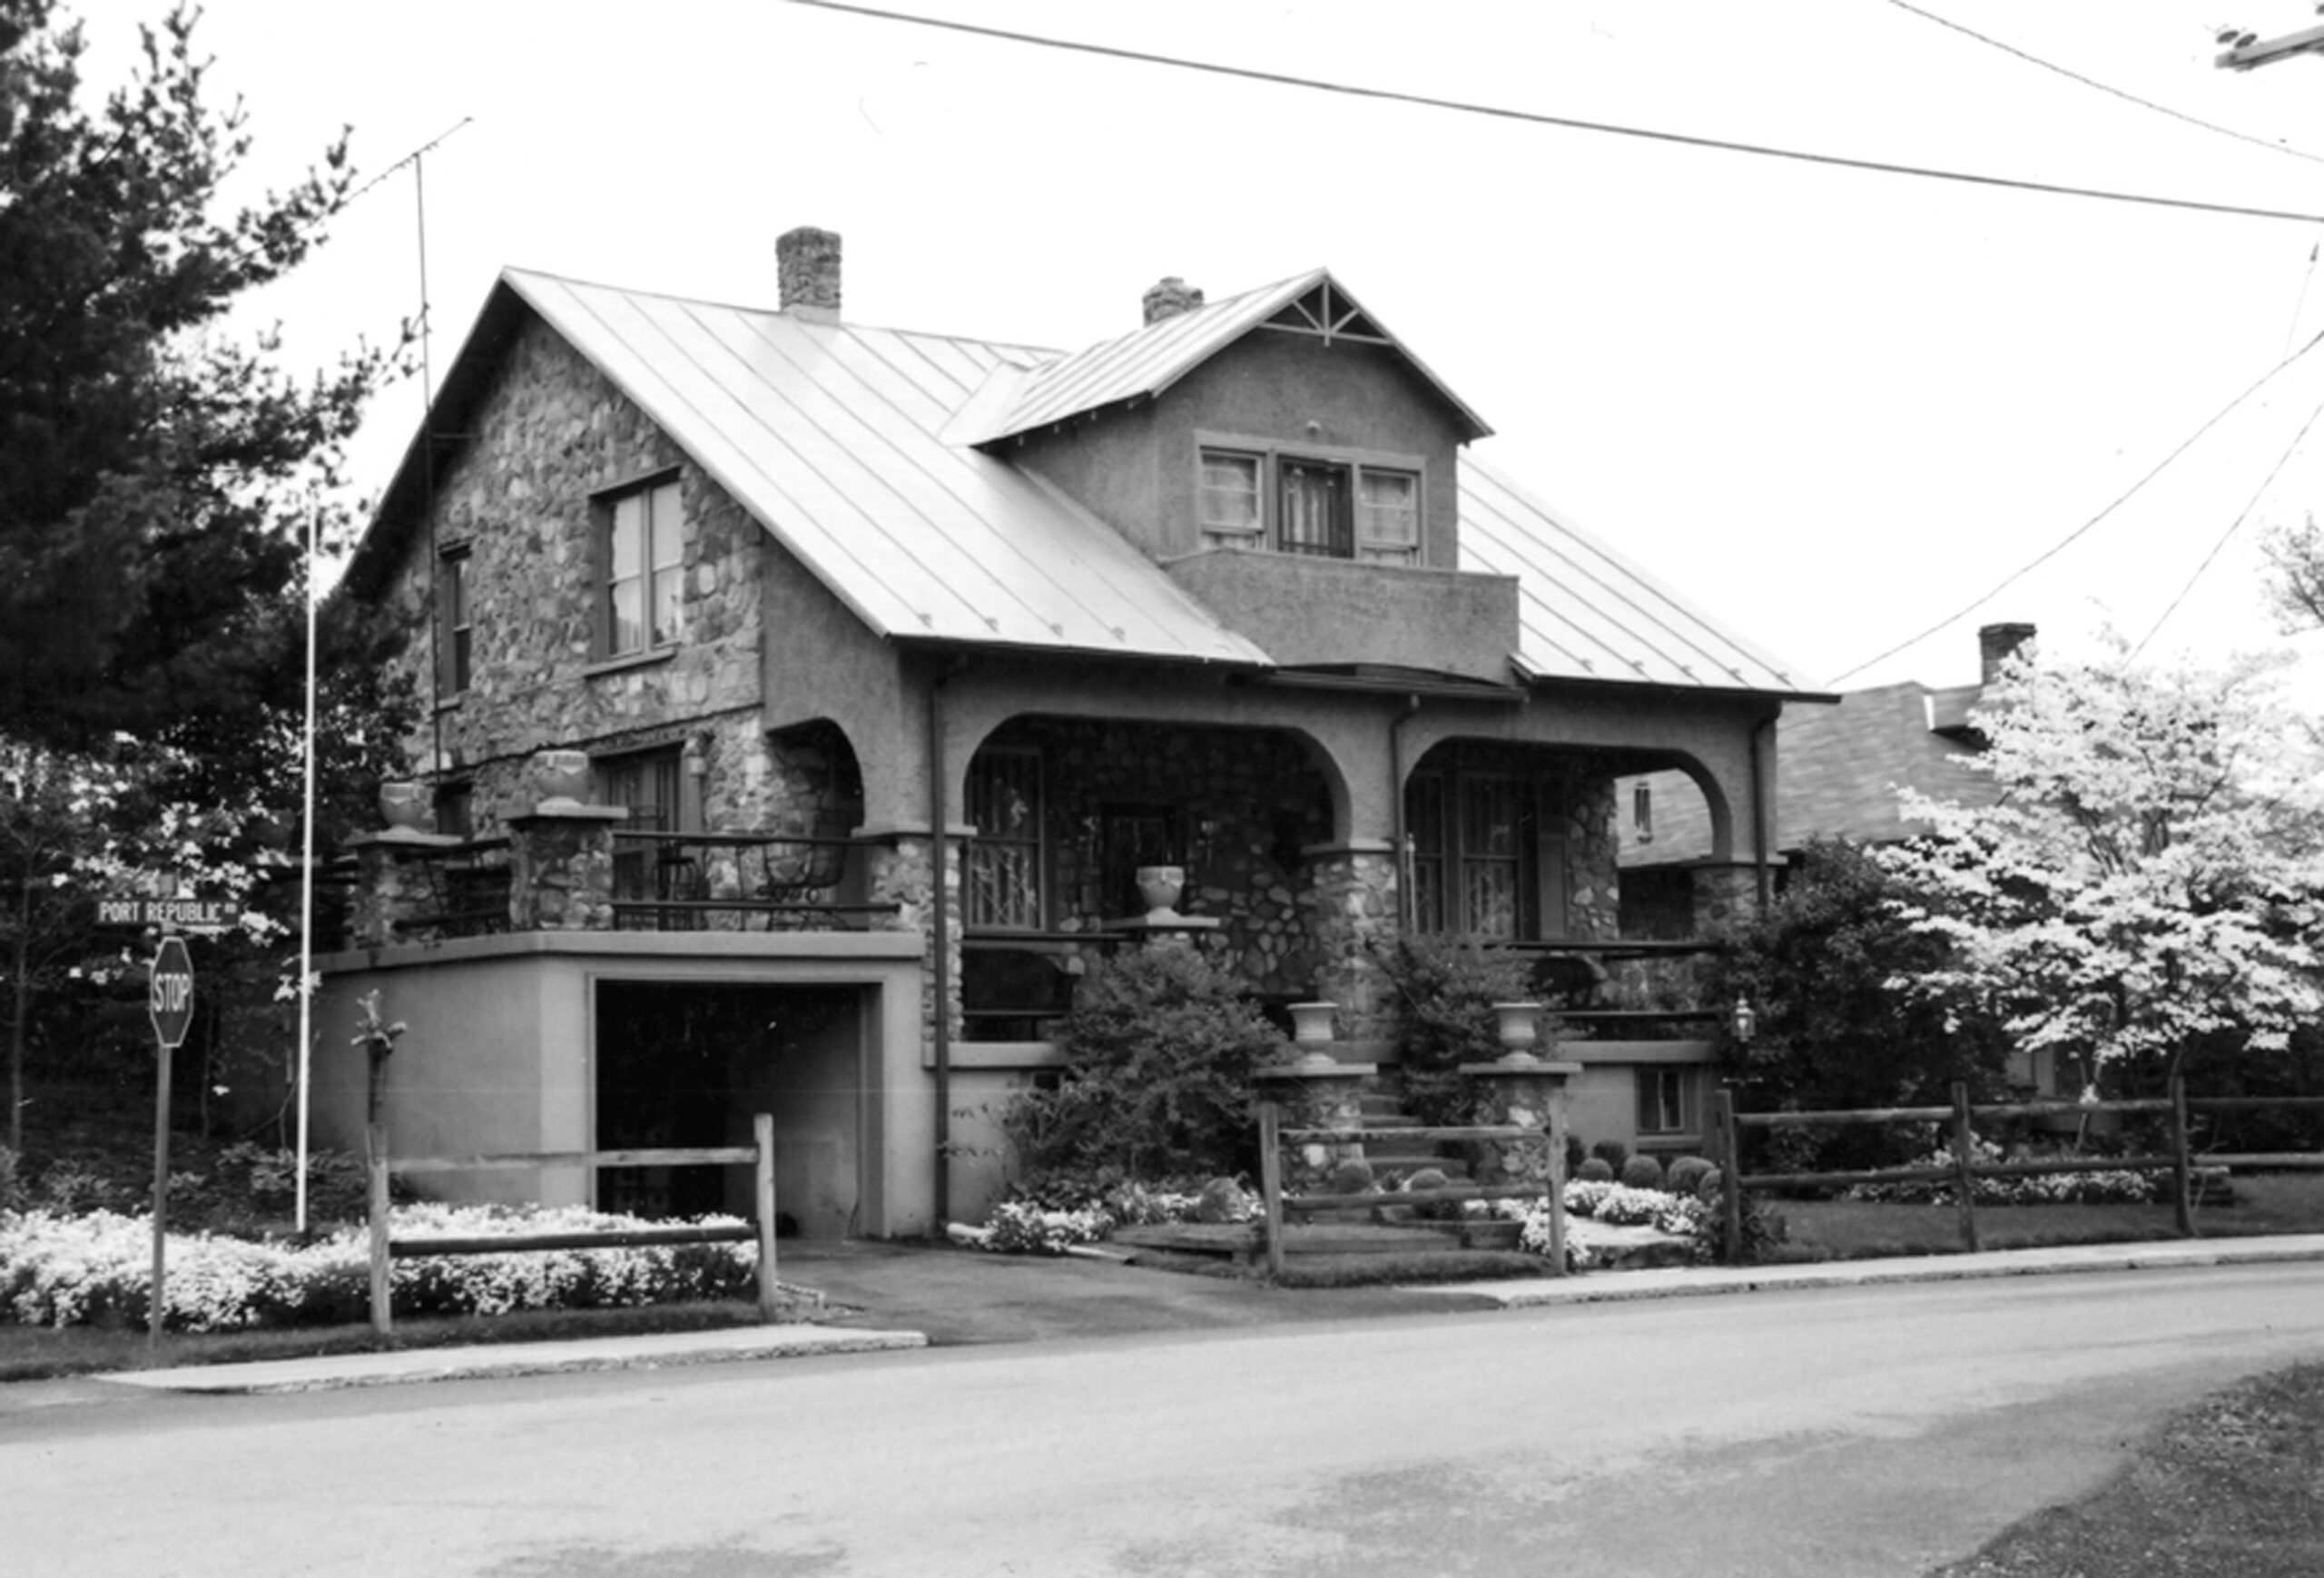 Tarry's Hotel. Photo credit: Leslie Giles, 2001